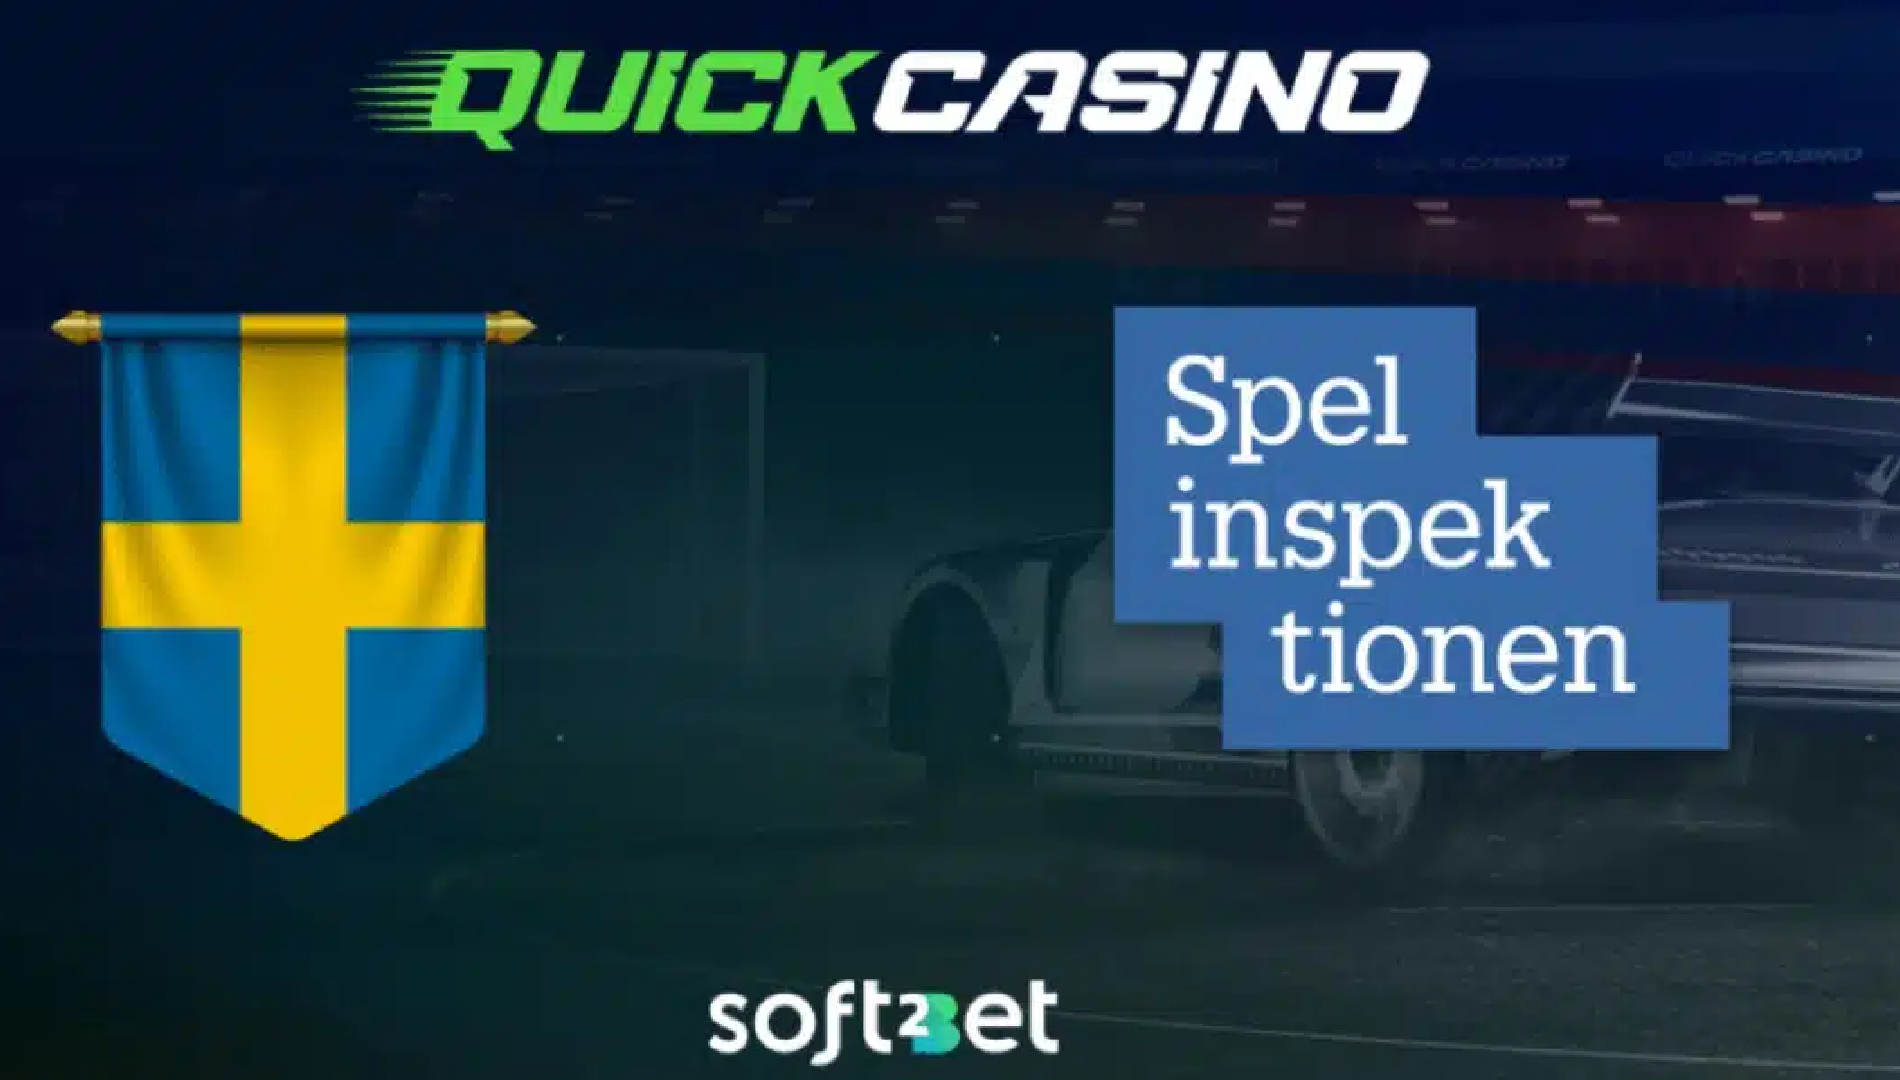 Soft2Bet Launches Cutting-Edge B2B iGaming Solution with Quickcasino.se Debut